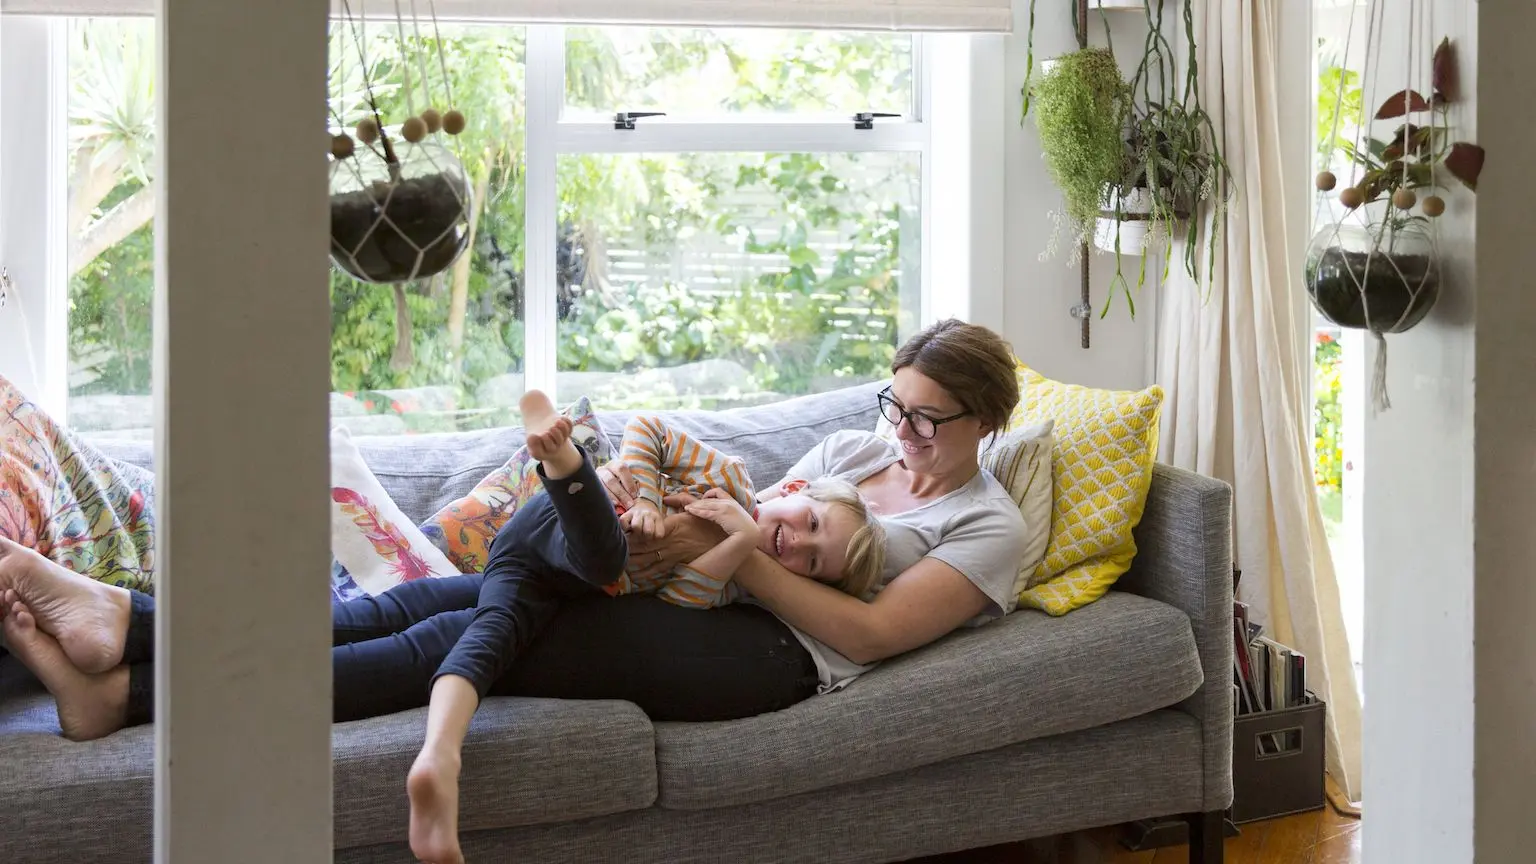 Woman and her son relaxing on the couch together